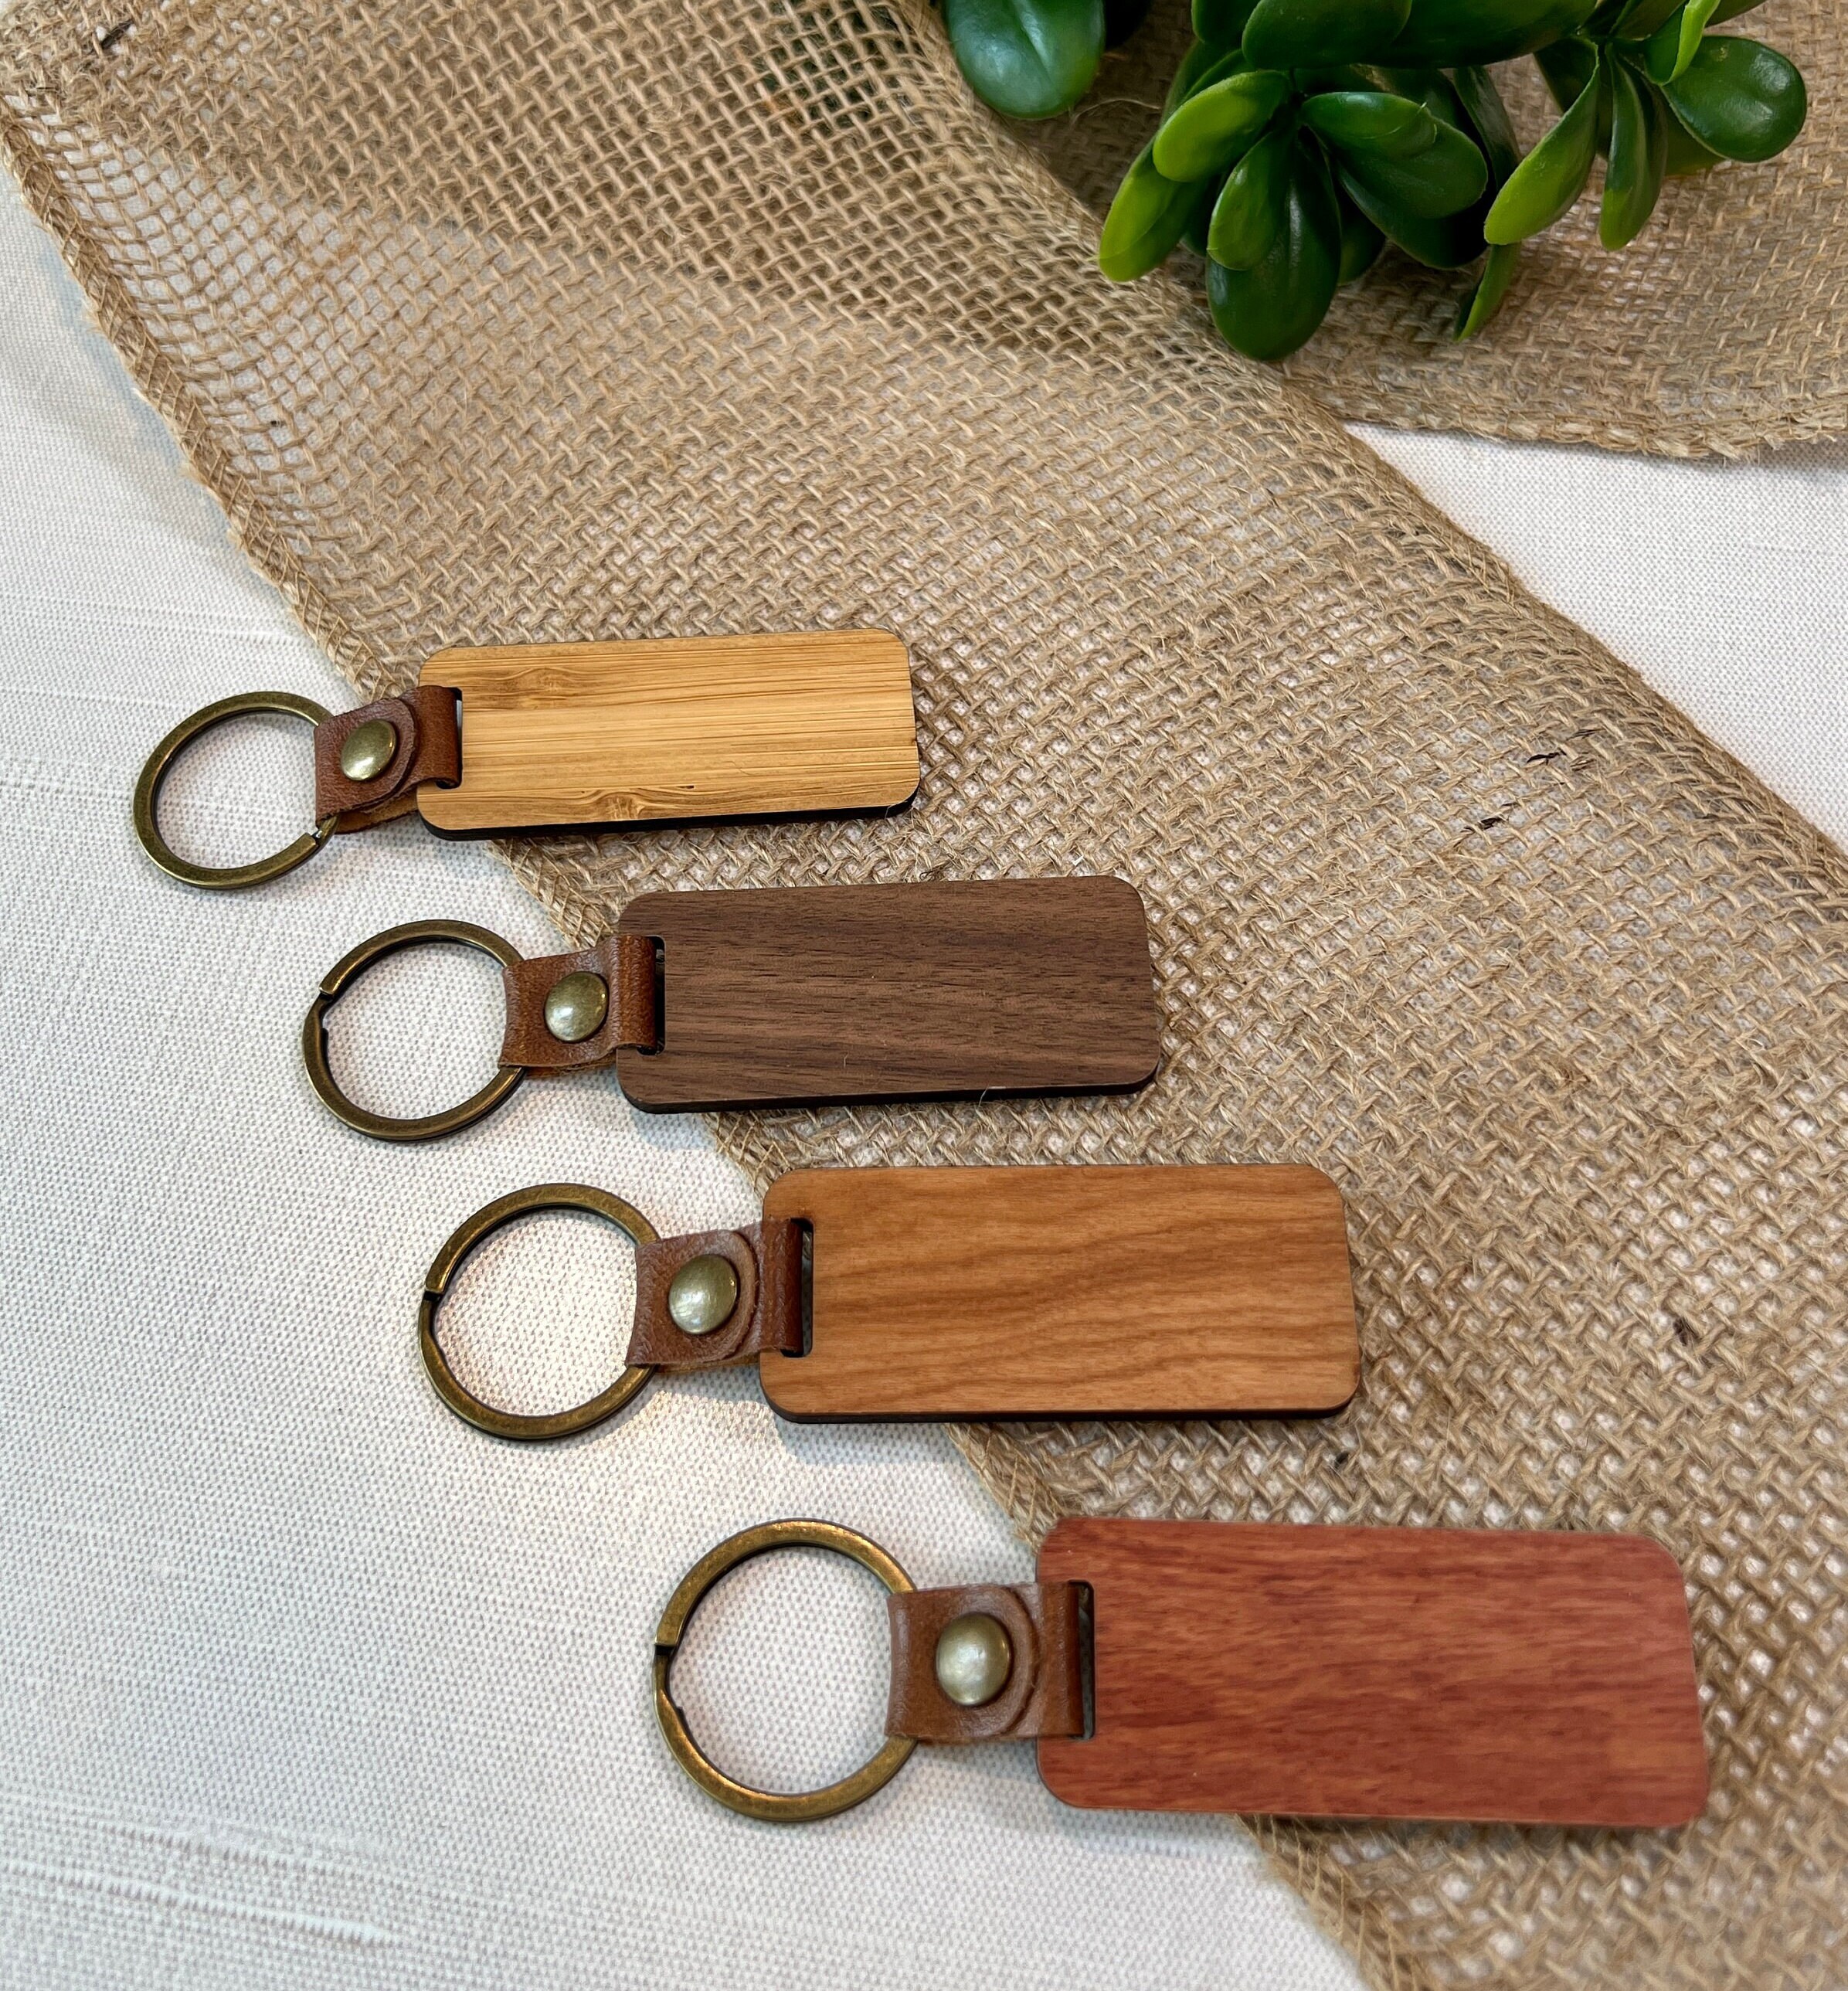 100Pieces Wooden Keychain Blanks Round Wood Engraving Blanks